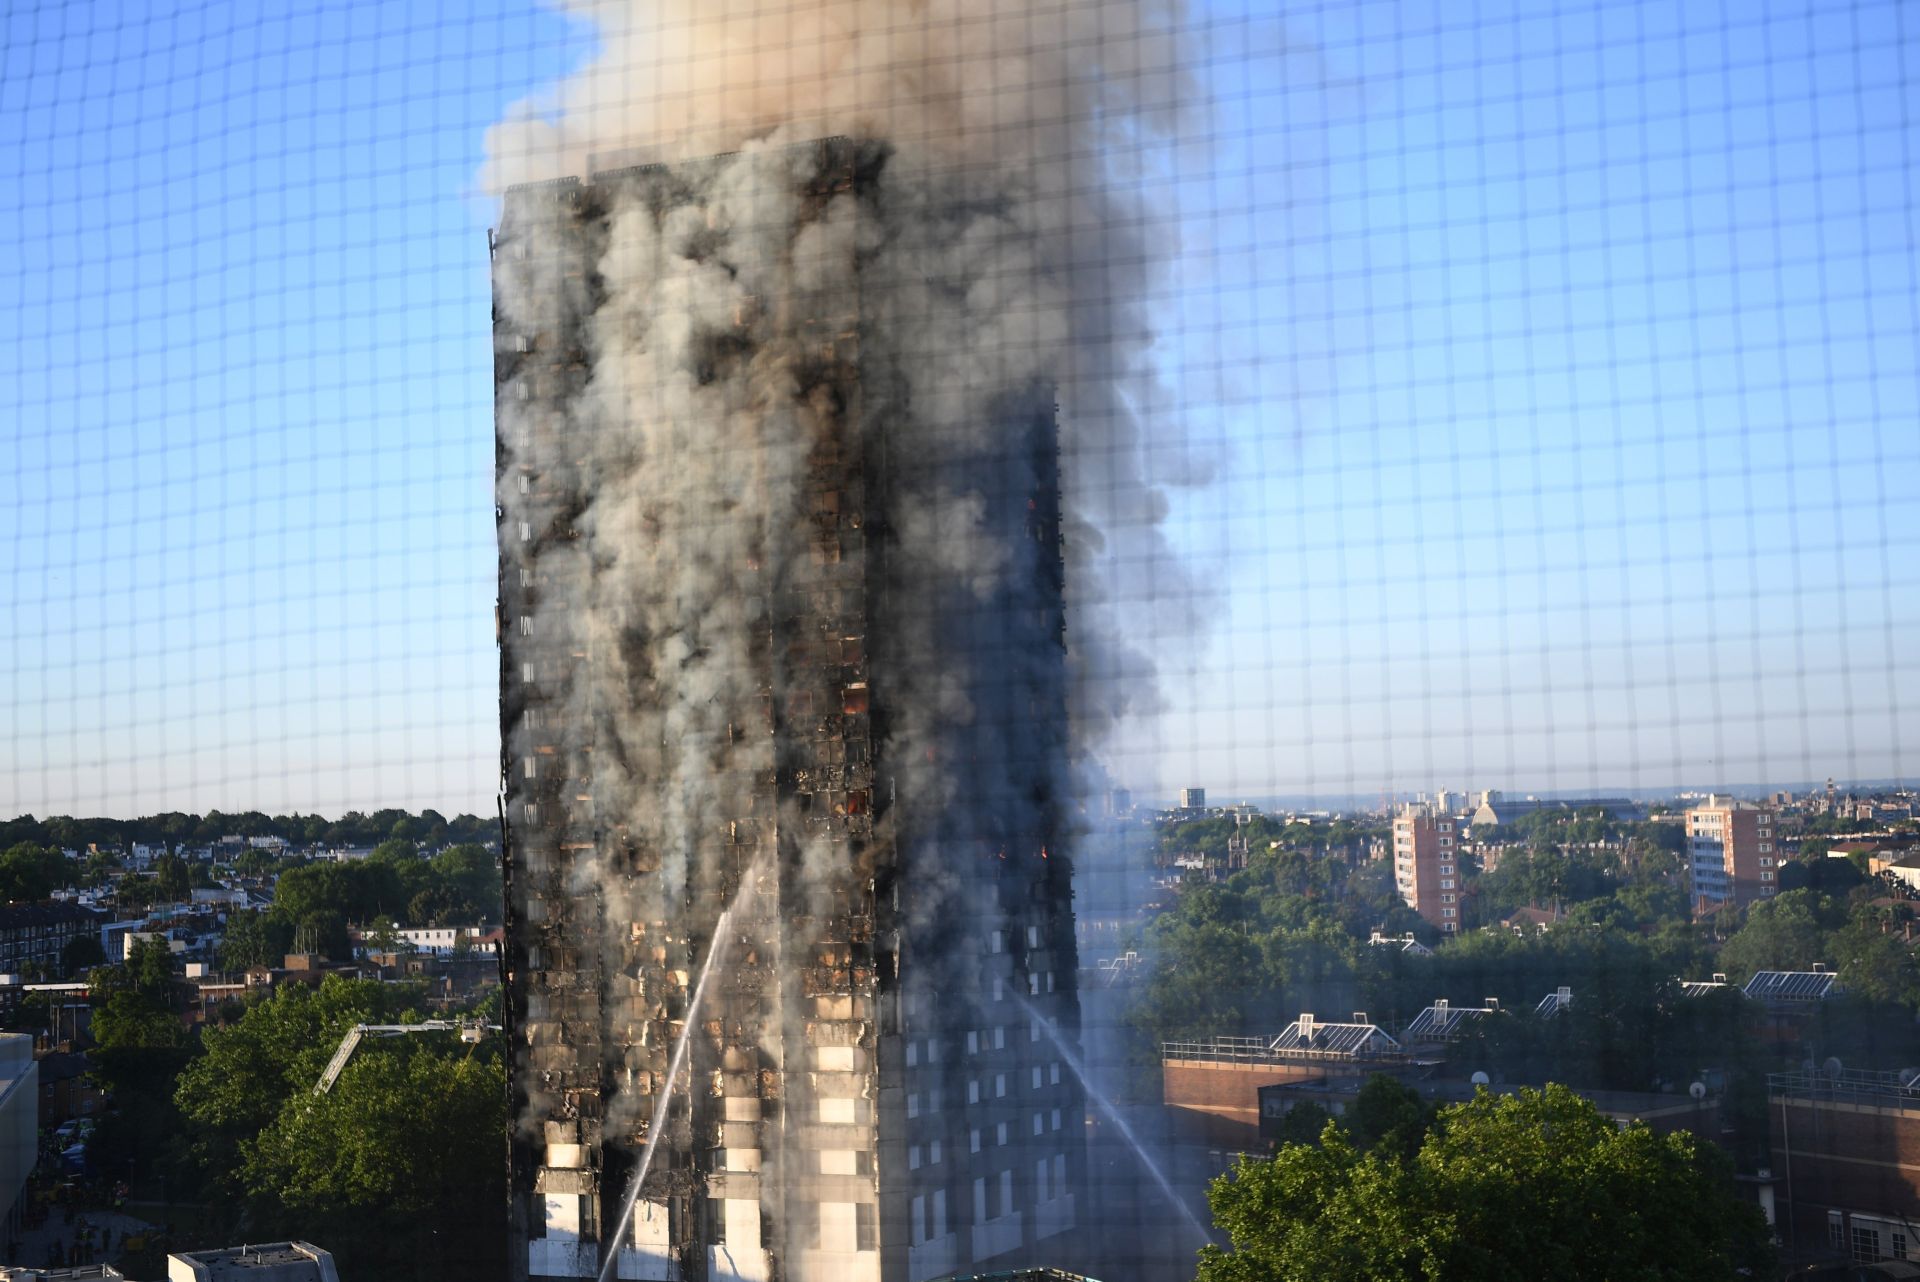 epa06027161 Smoke rises from the fire at the Grenfell Tower, a 24-storey apartment block seen through a fence in North Kensington, London, Britain, 14 June 2017. According to the London Fire Brigade, 40 fire engines and 200 firefighters are working to put out the blaze. Residents in the tower were said to be evacuating and a number of people were treated for a 'range of injuries,' Metropolitan Police said.  EPA/FACUNDO ARRIZABALAGA